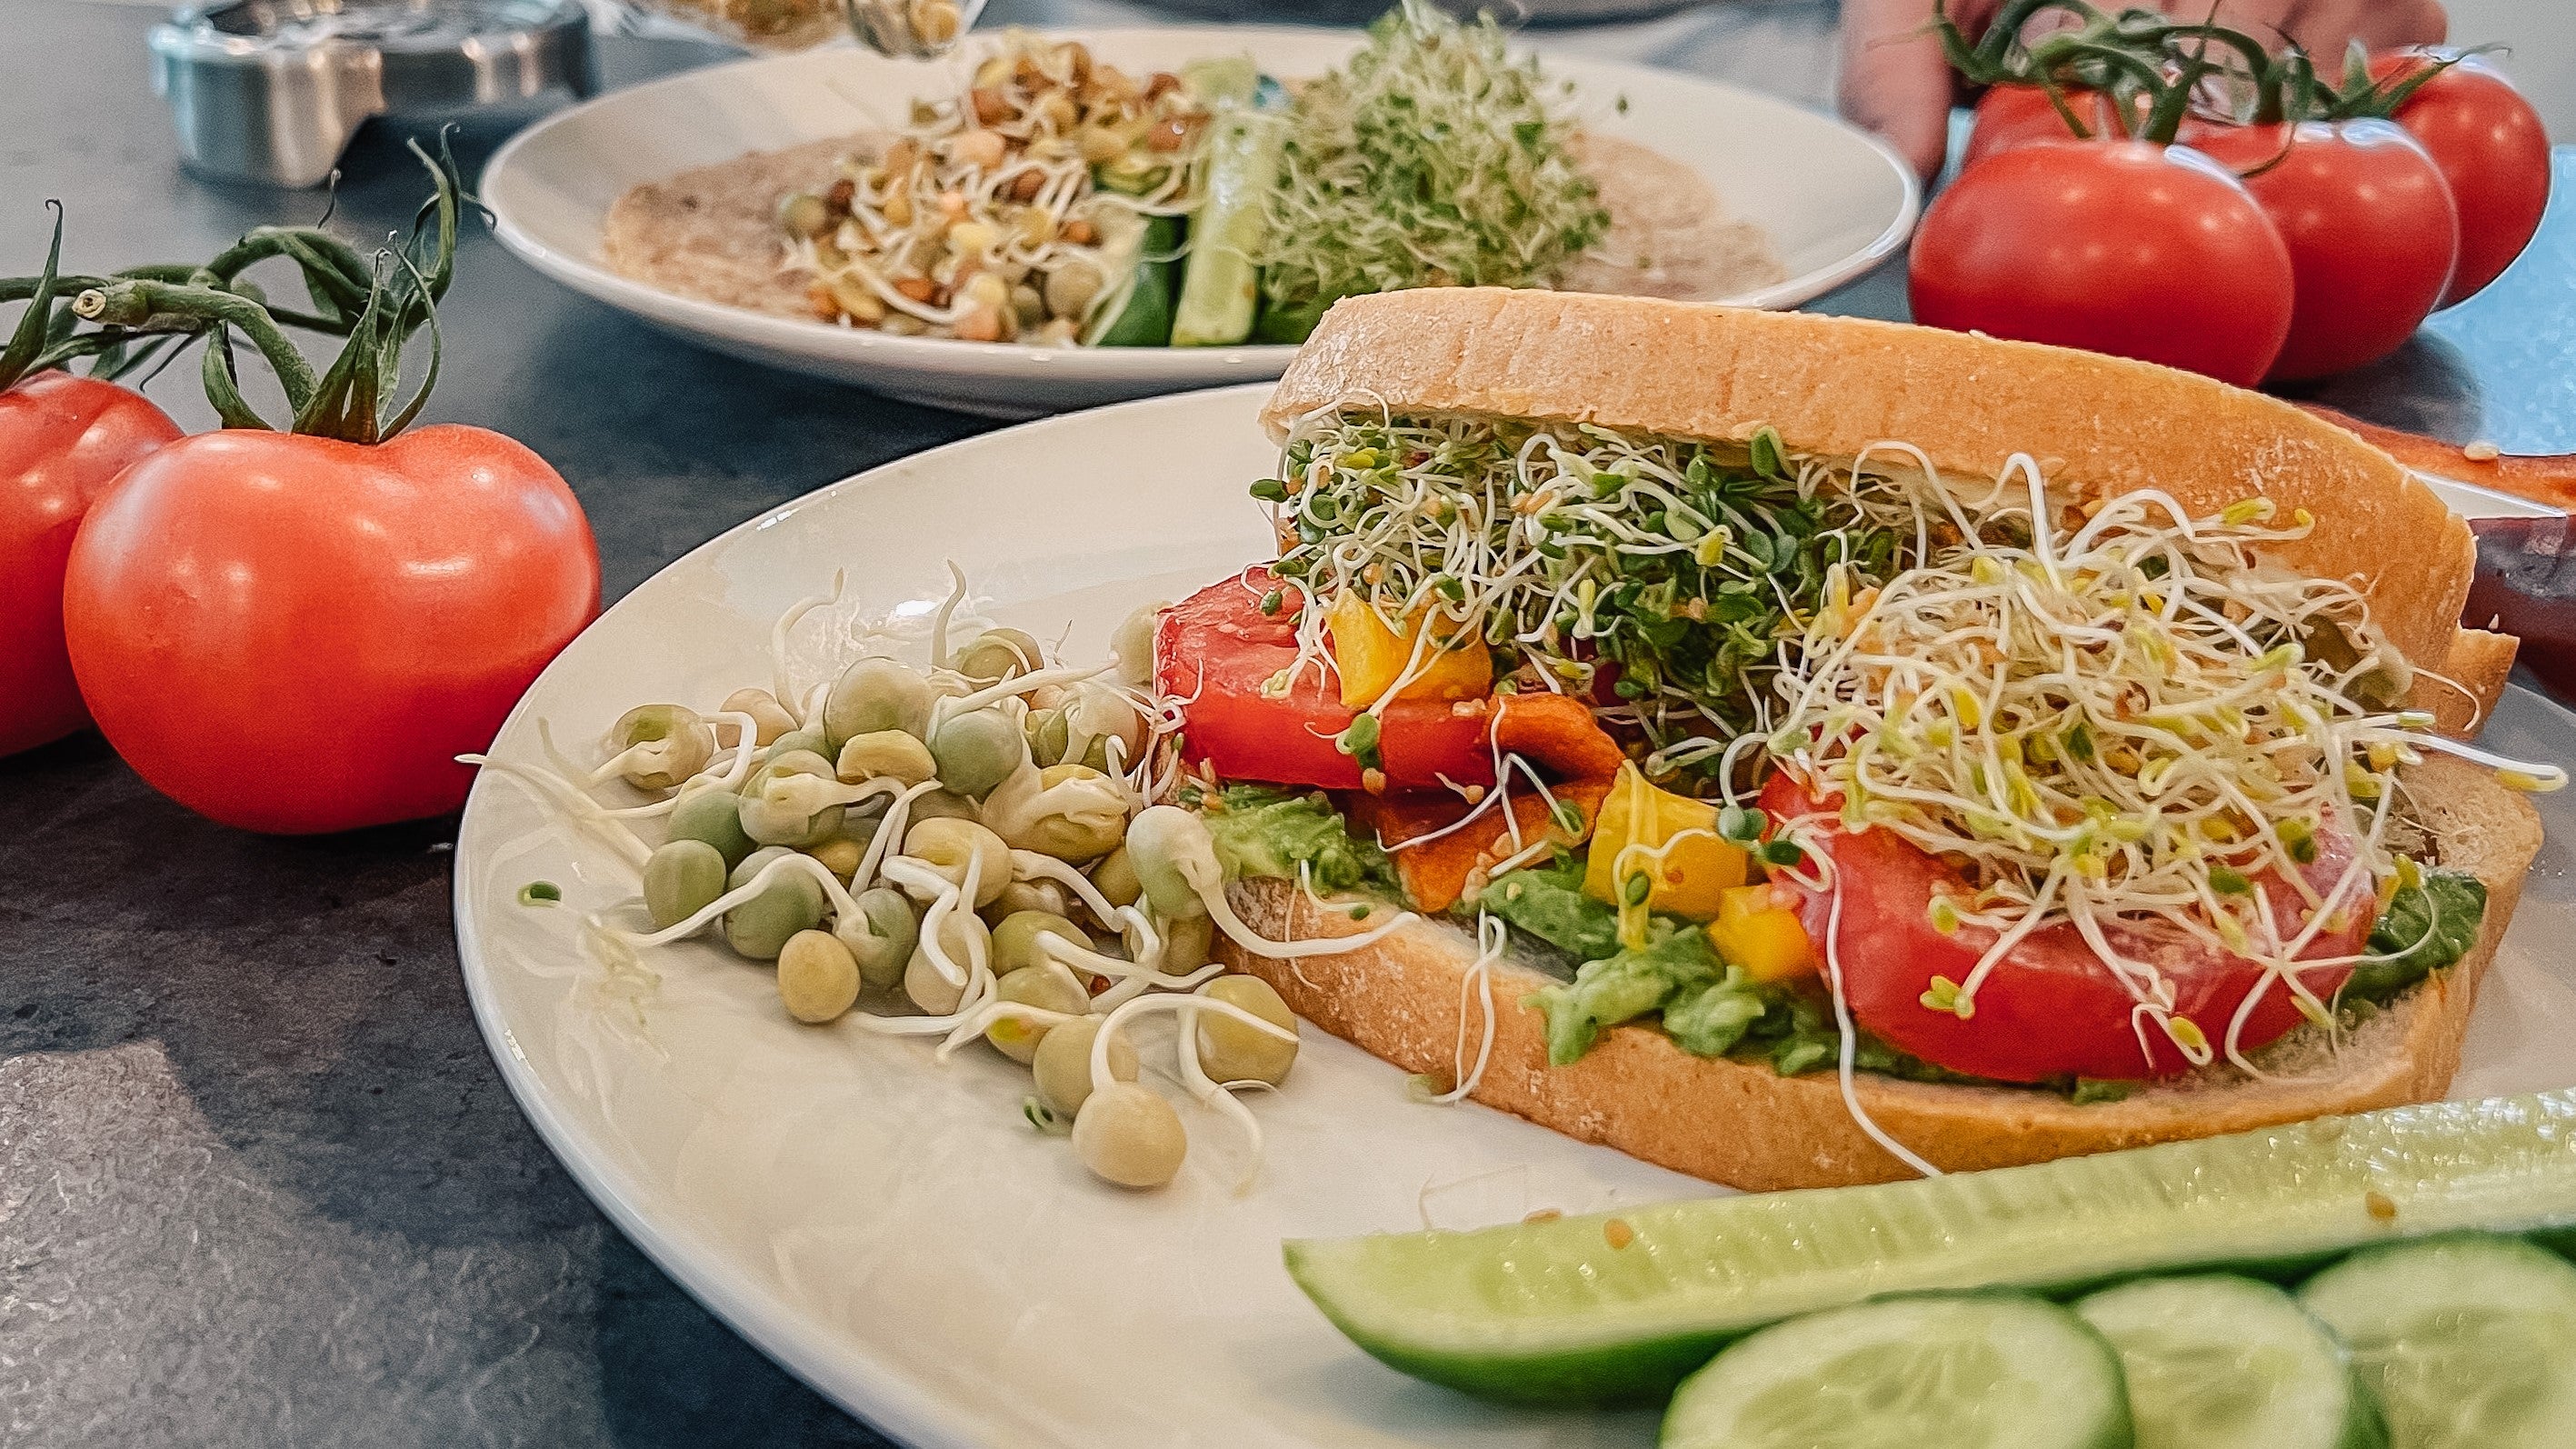 Broccoli sprouts, alfalfa sprouts, and bean sprouts on a sandwich in a healthy lunch